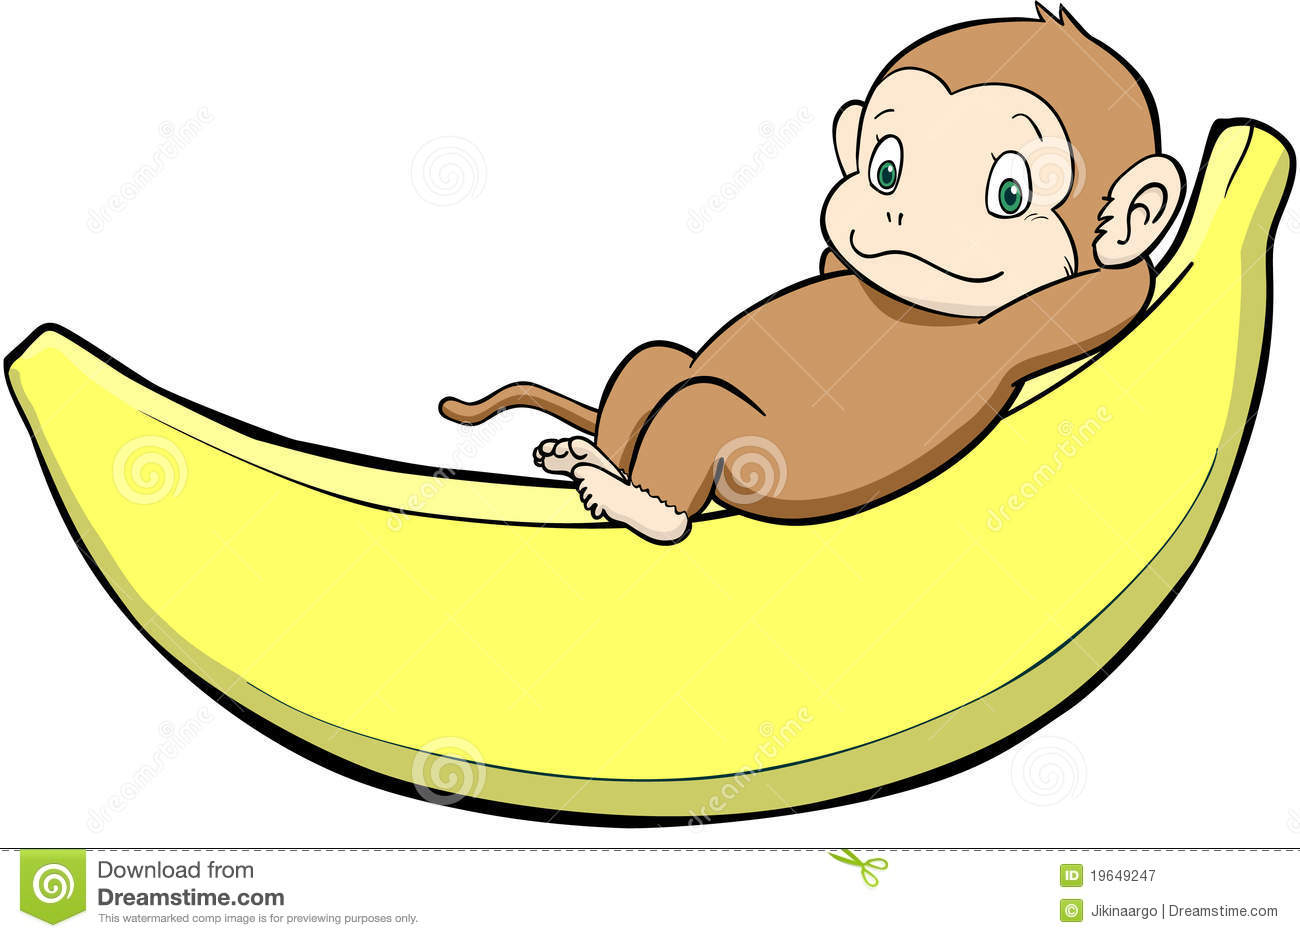 How to draw a. Bananas clipart cute